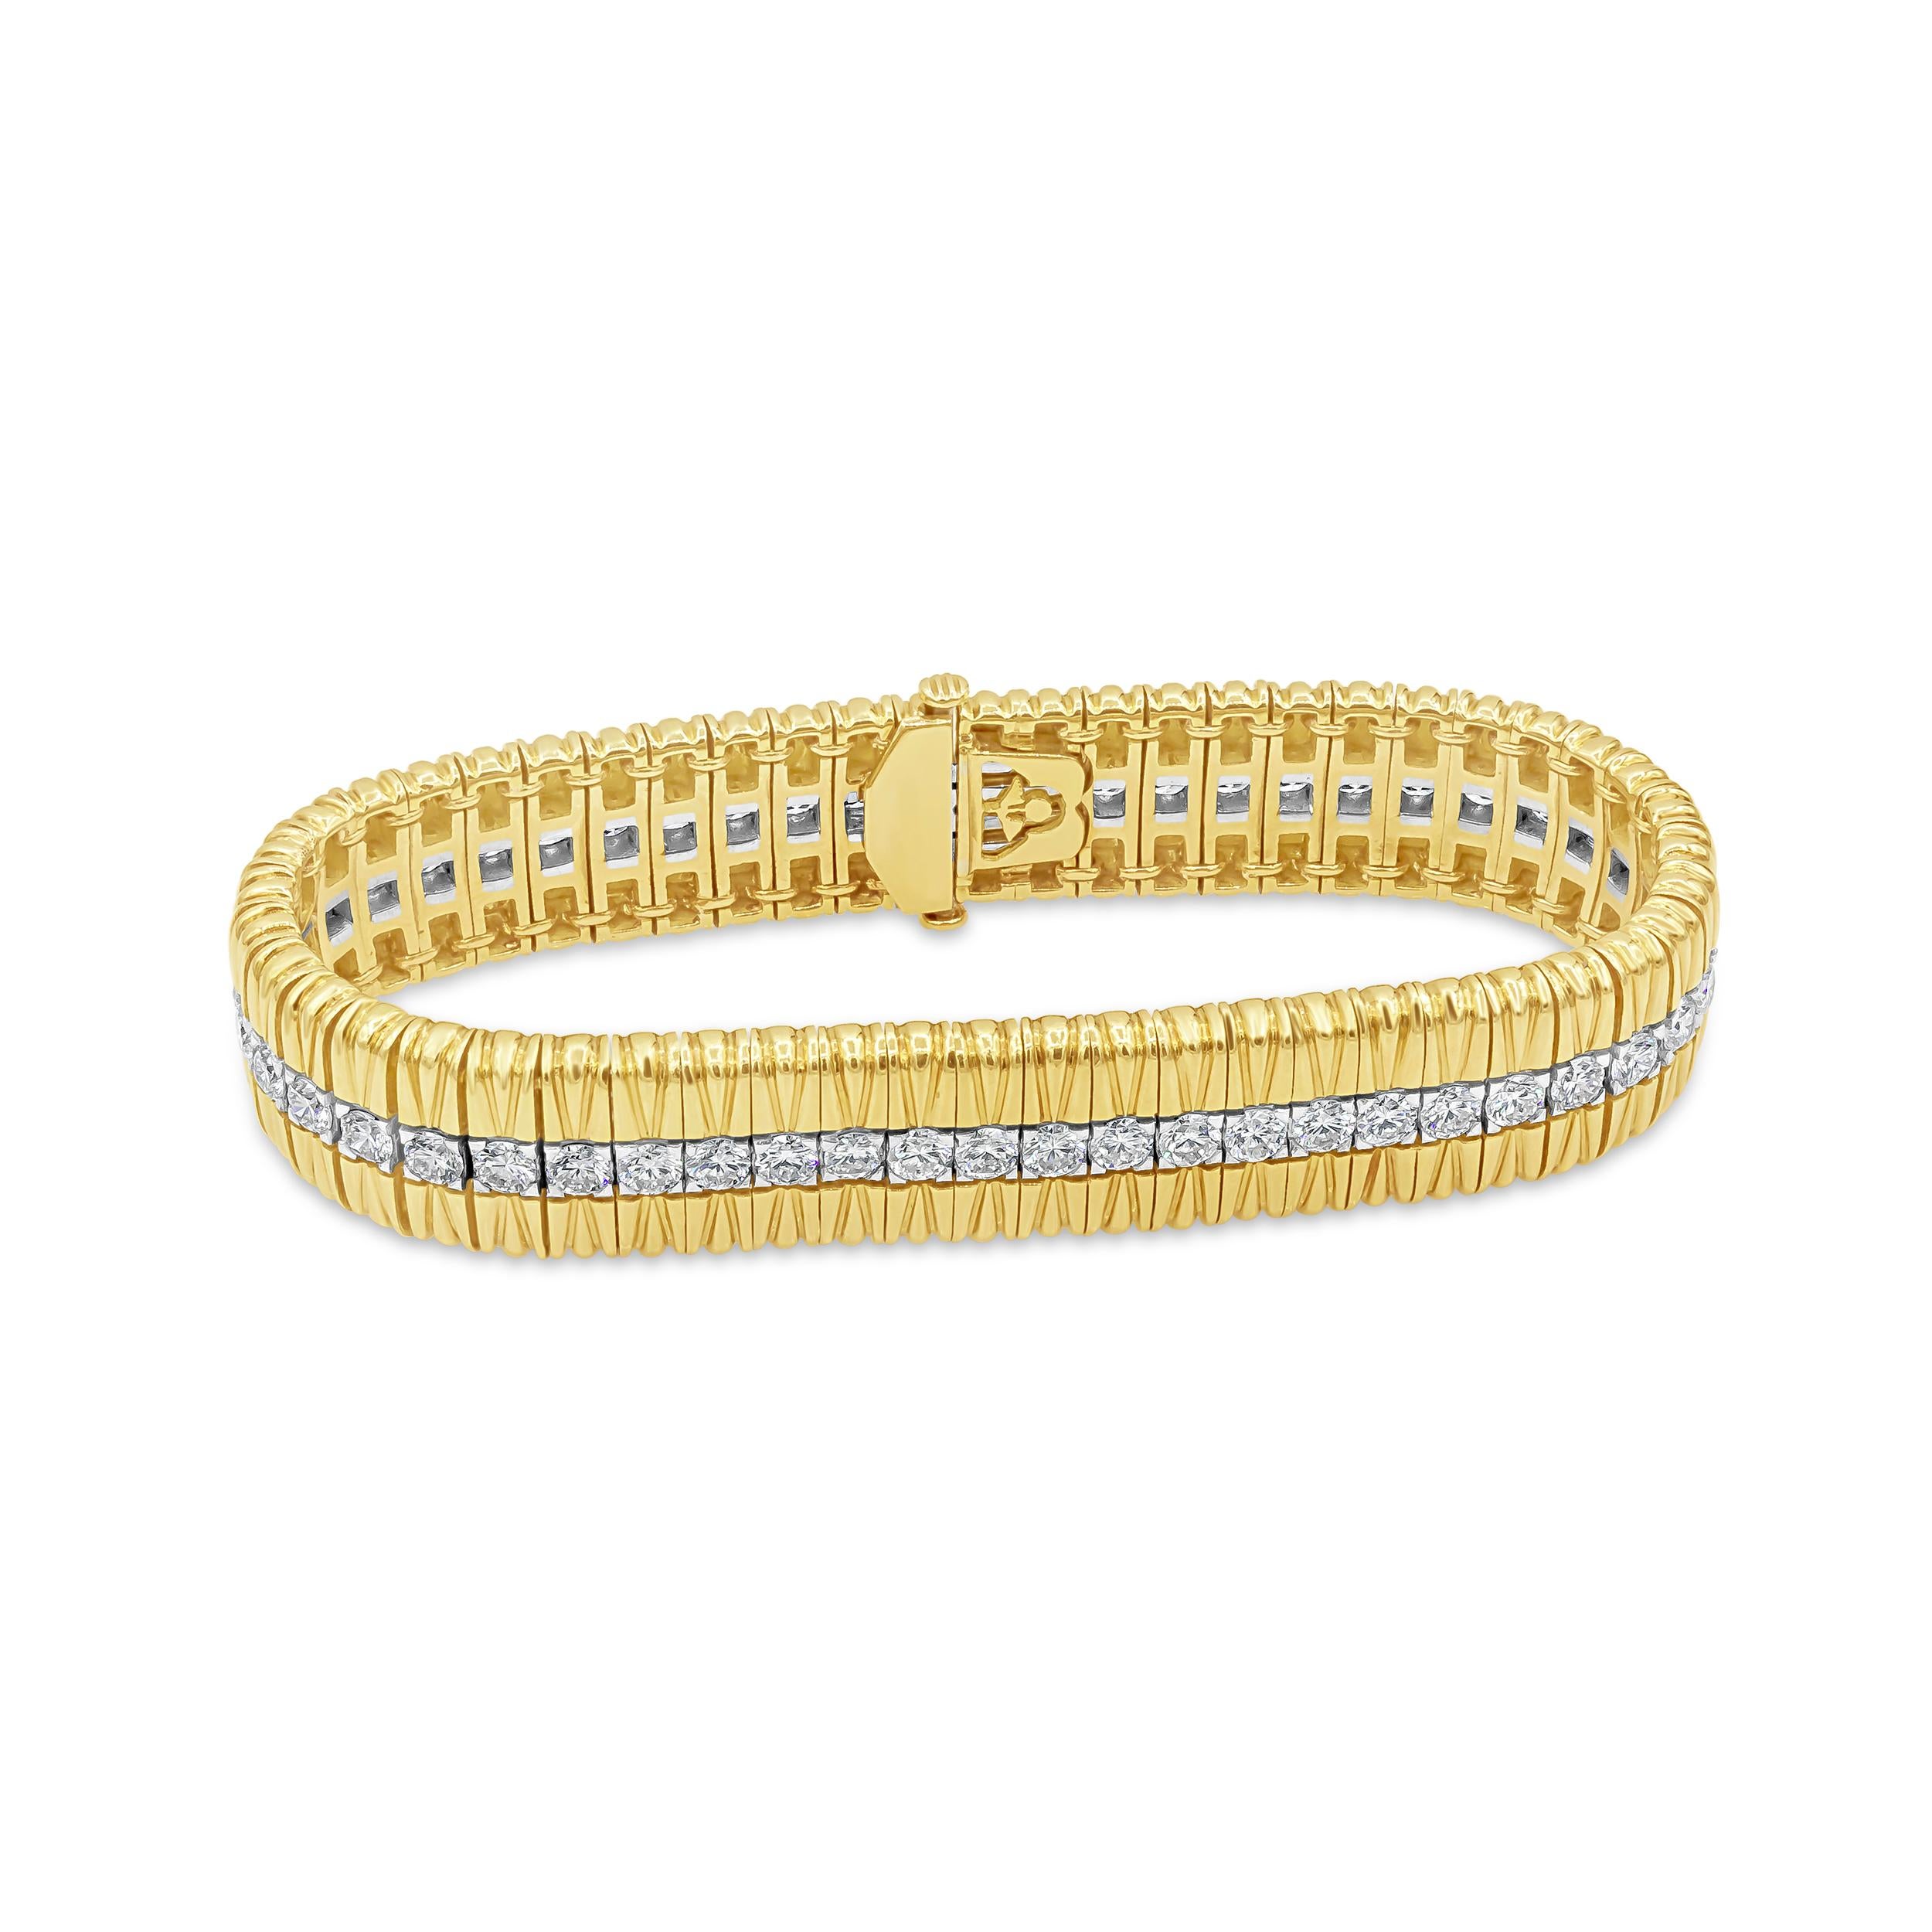 Showcasing a line of round brilliant diamonds weighing 5.68 carats total, each diamond set in a flushed basket setting made in platinum. The line of diamonds is set in-between 18K yellow gold. Diamonds are approximately F +color, VS + clarity.

